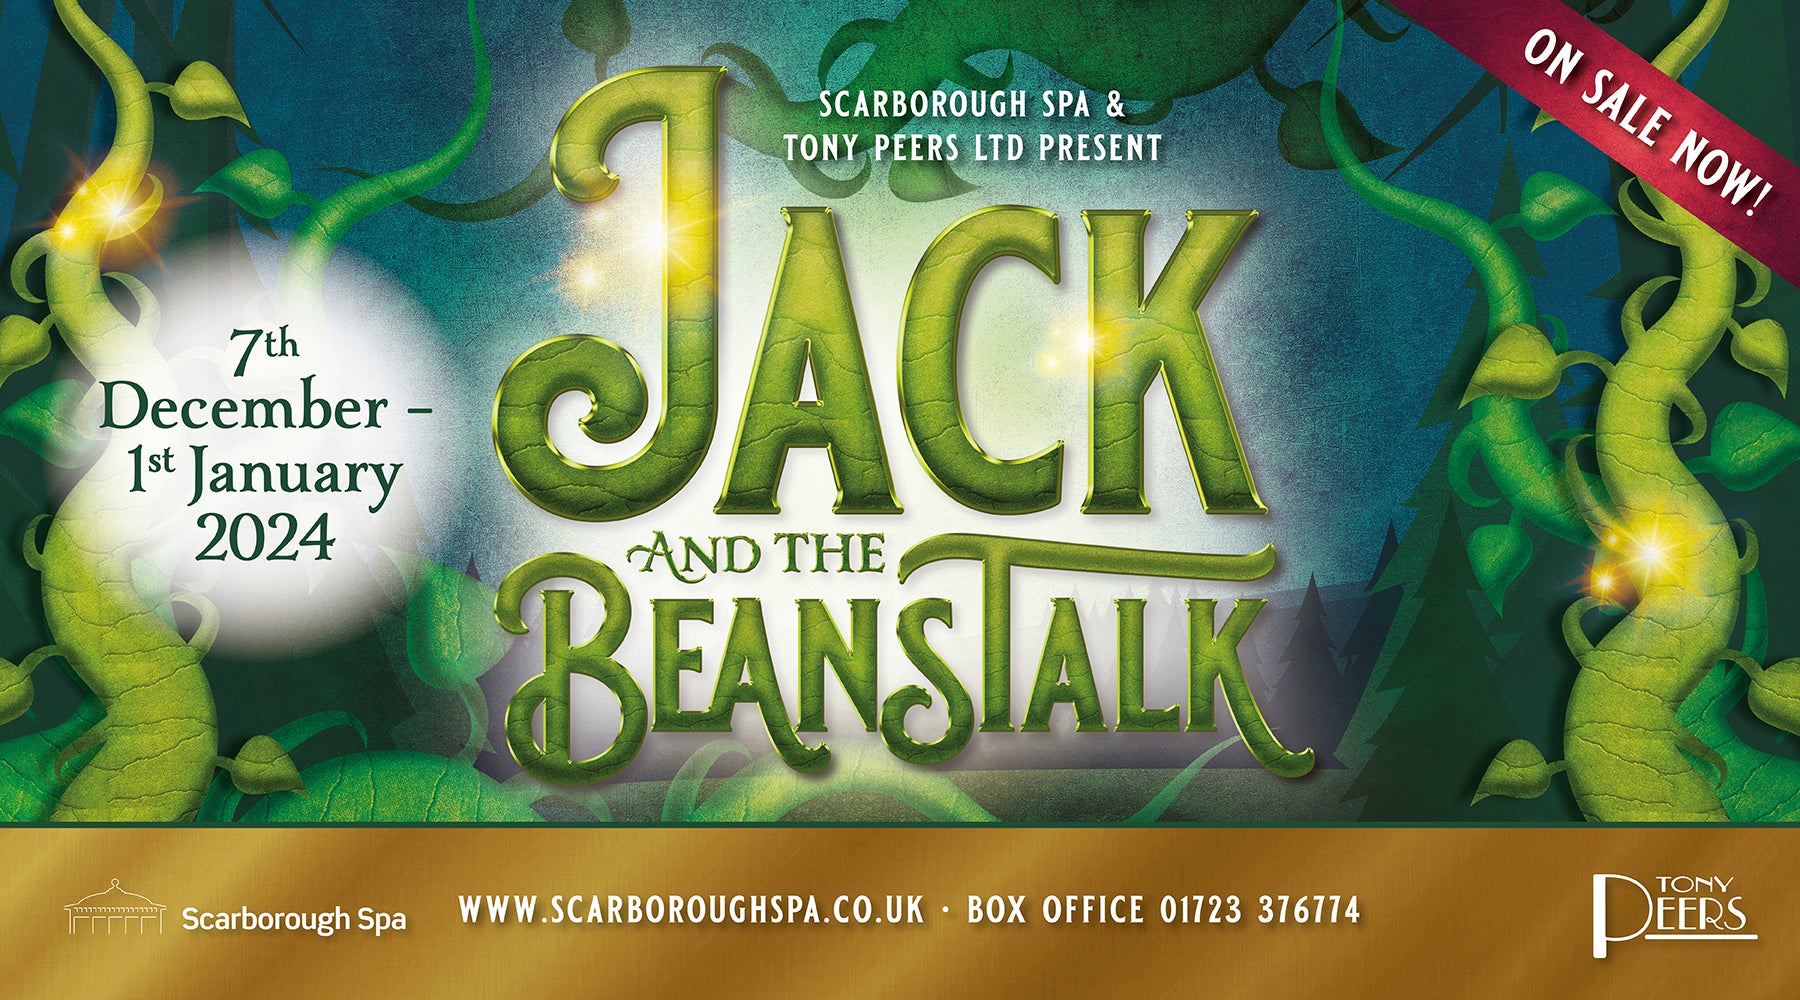 Image name Jack and the Beanstalk at Scarborough Spa Theatre Scarborough the 21 image from the post Jack and the Beanstalk at Scarborough Spa Theatre, Scarborough in Yorkshire.com.